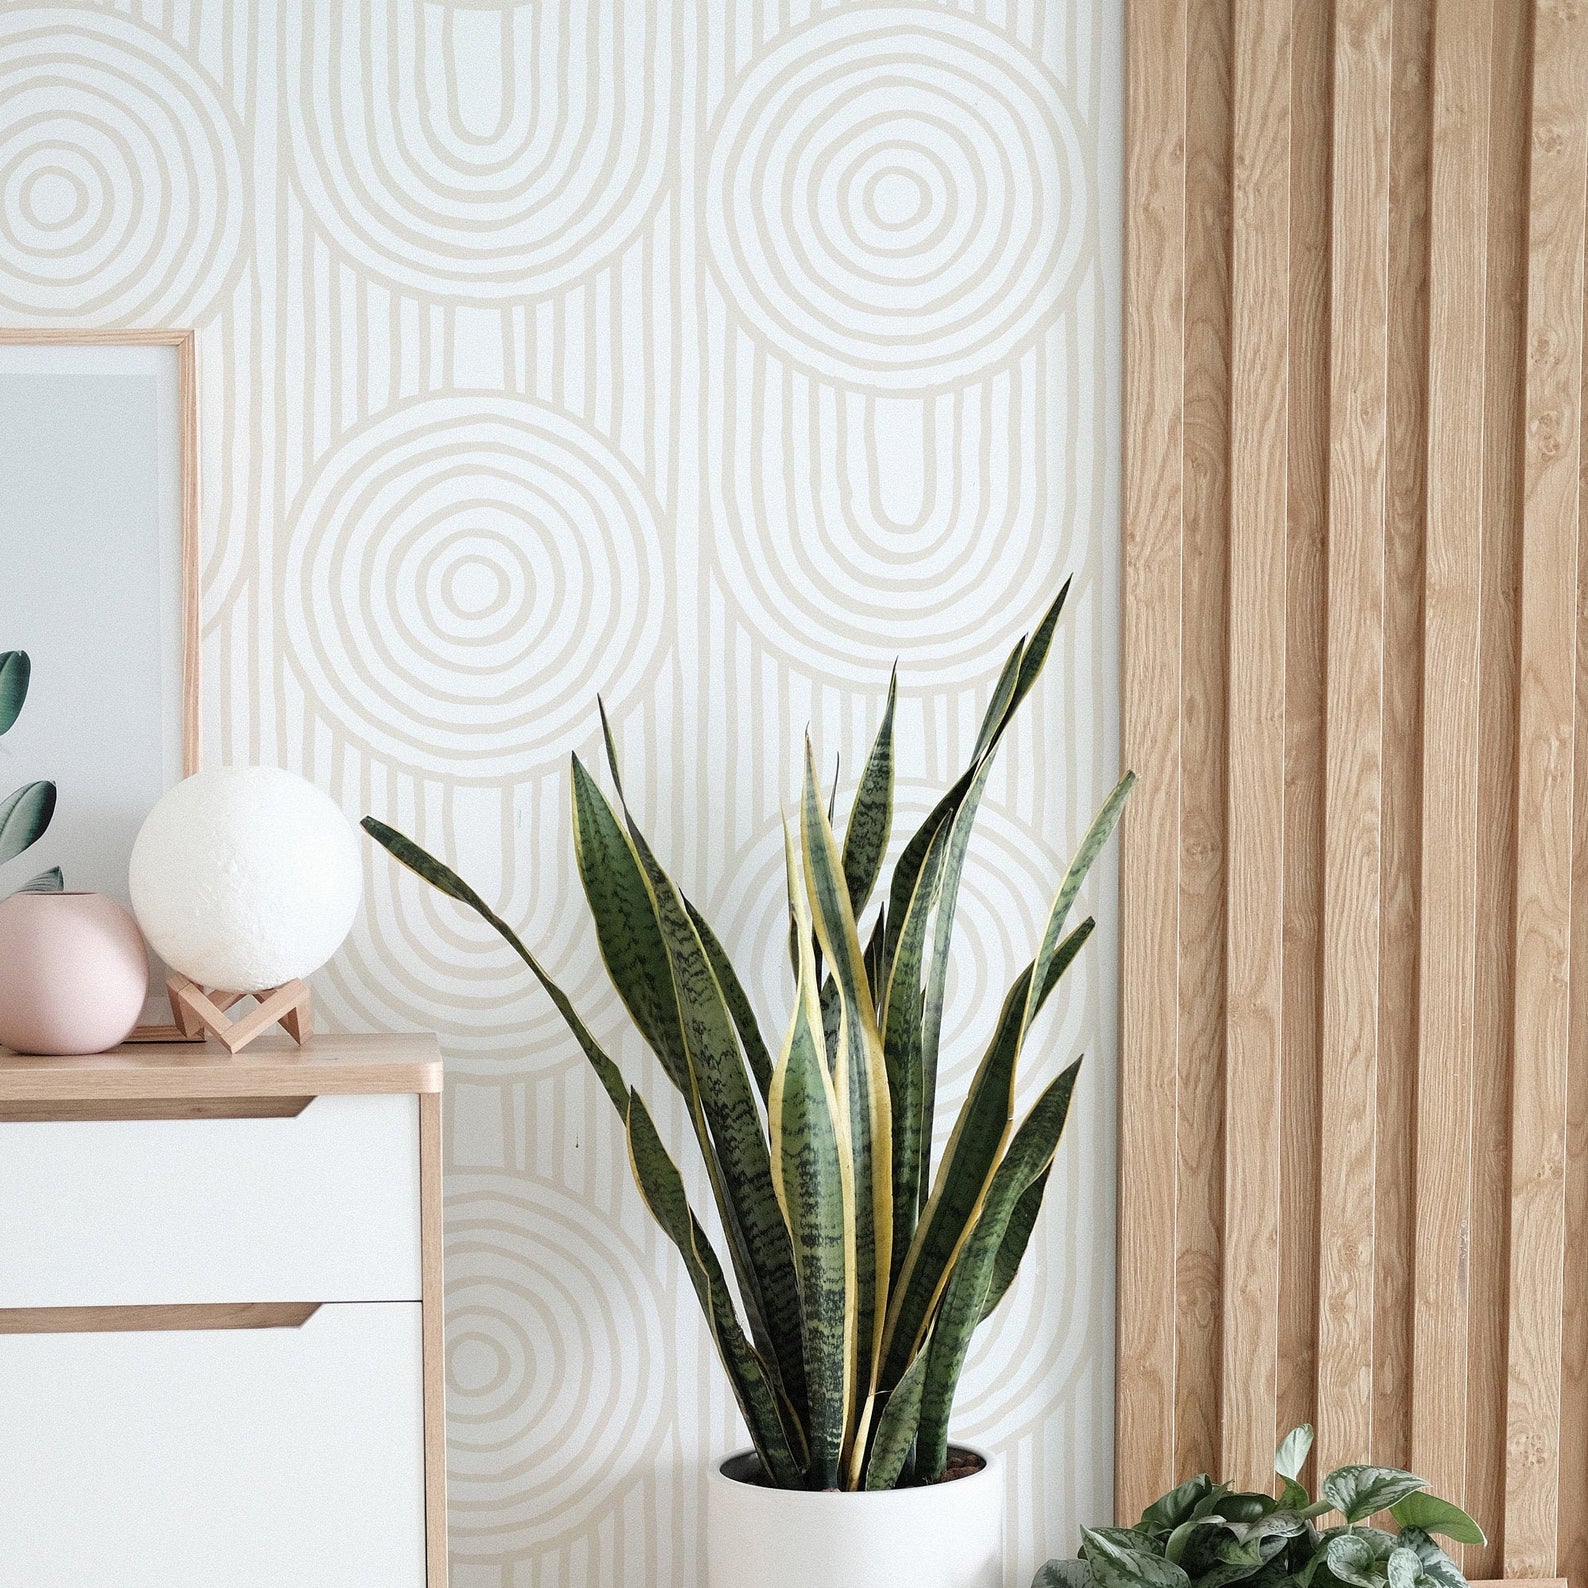 A modern and serene interior featuring the Zen Abstract Wallpaper, with a pattern of neutral-toned concentric circles and elongated ovals on a light background. The design adds a subtle organic touch to the room, complemented by wooden furniture and green houseplants.